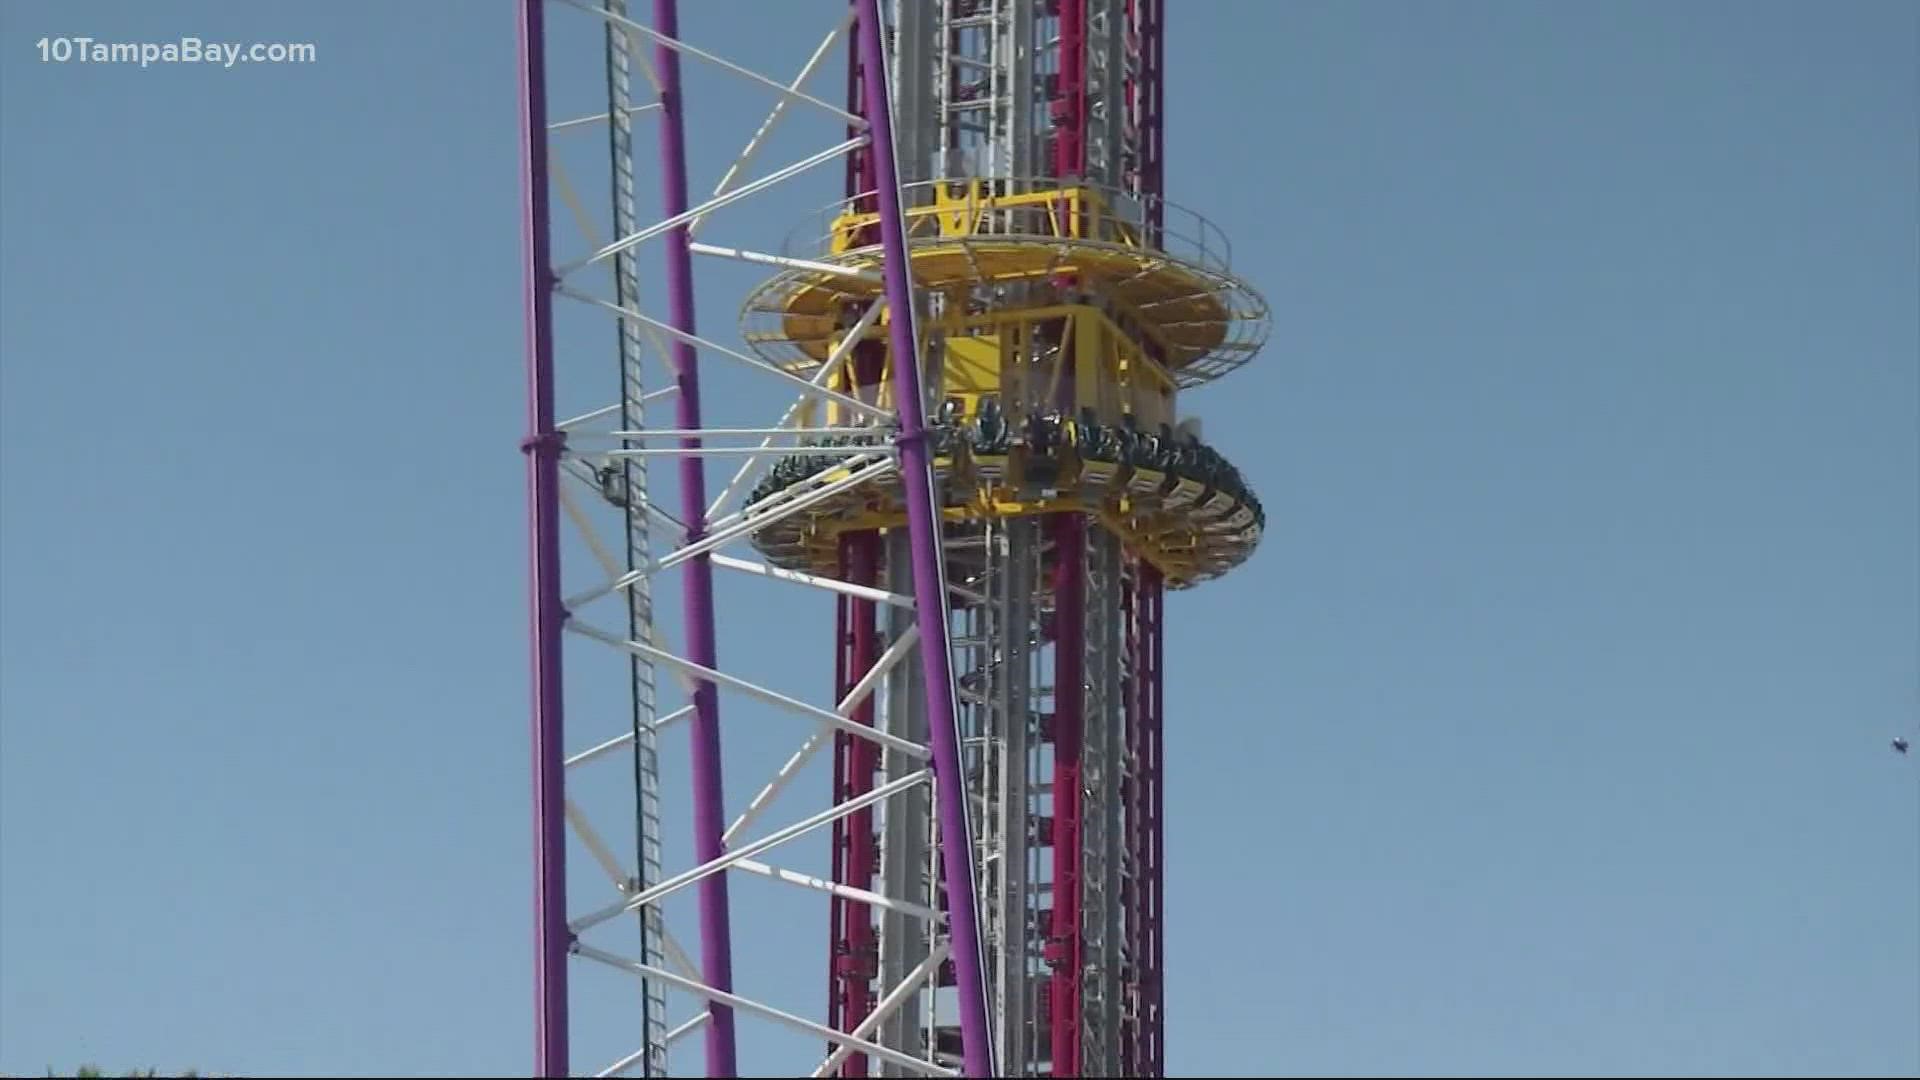 A 14-year-old boy died after falling from the free-fall ride in ICON Park.